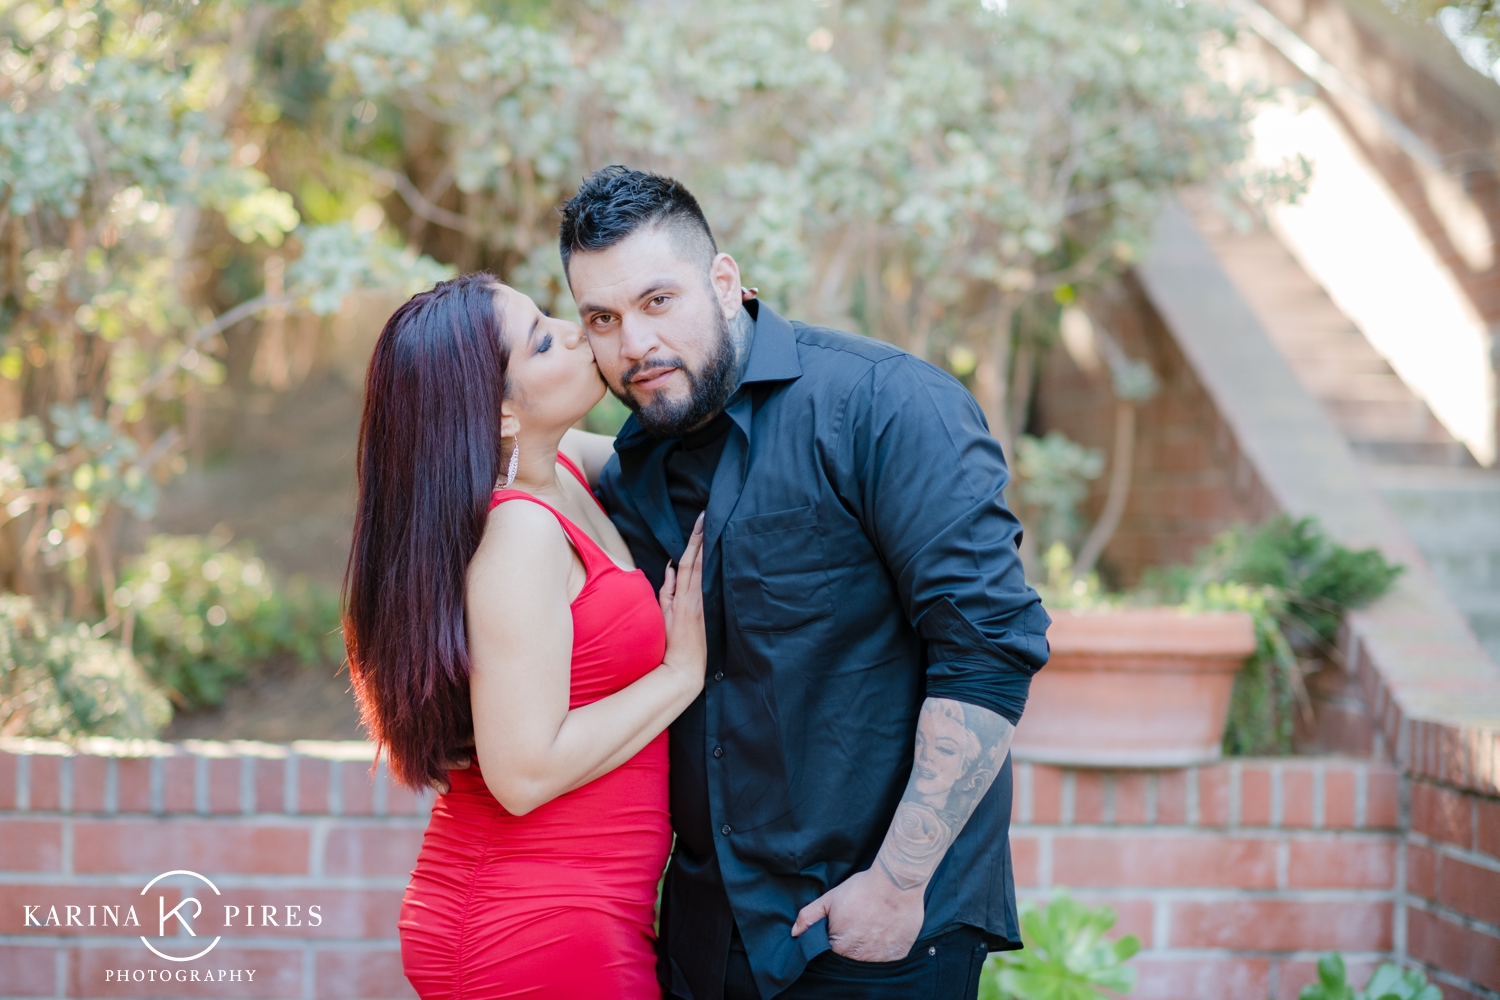 Jackie and David’s Couples Portraits in Los Angeles